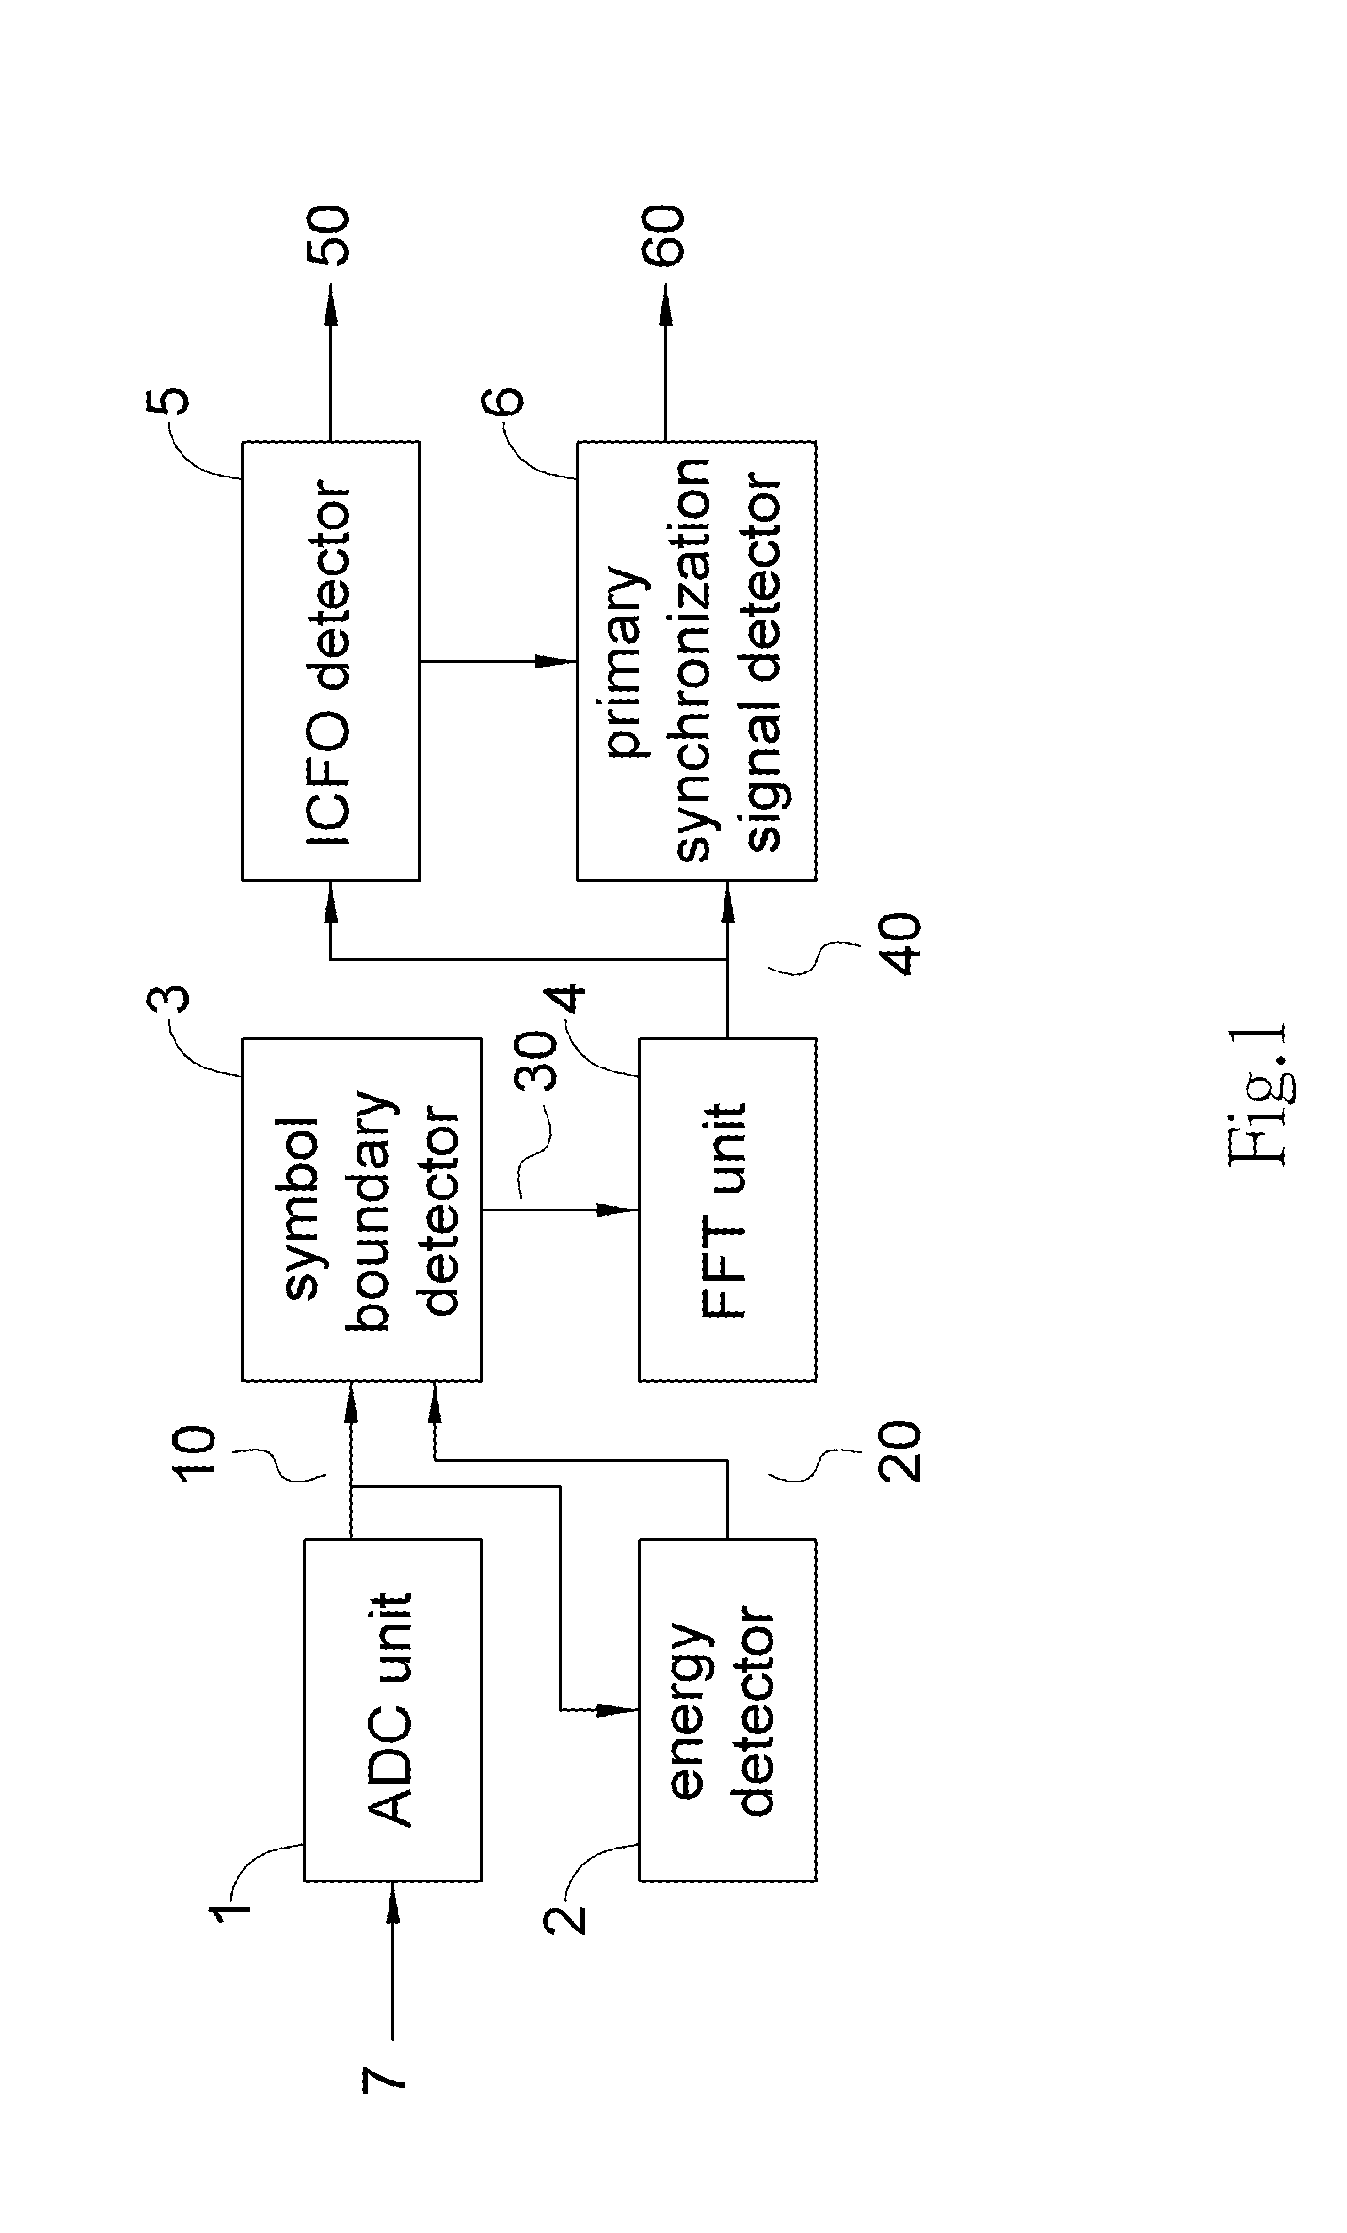 Method and apparatus for cell search and synchronization in mobile communication